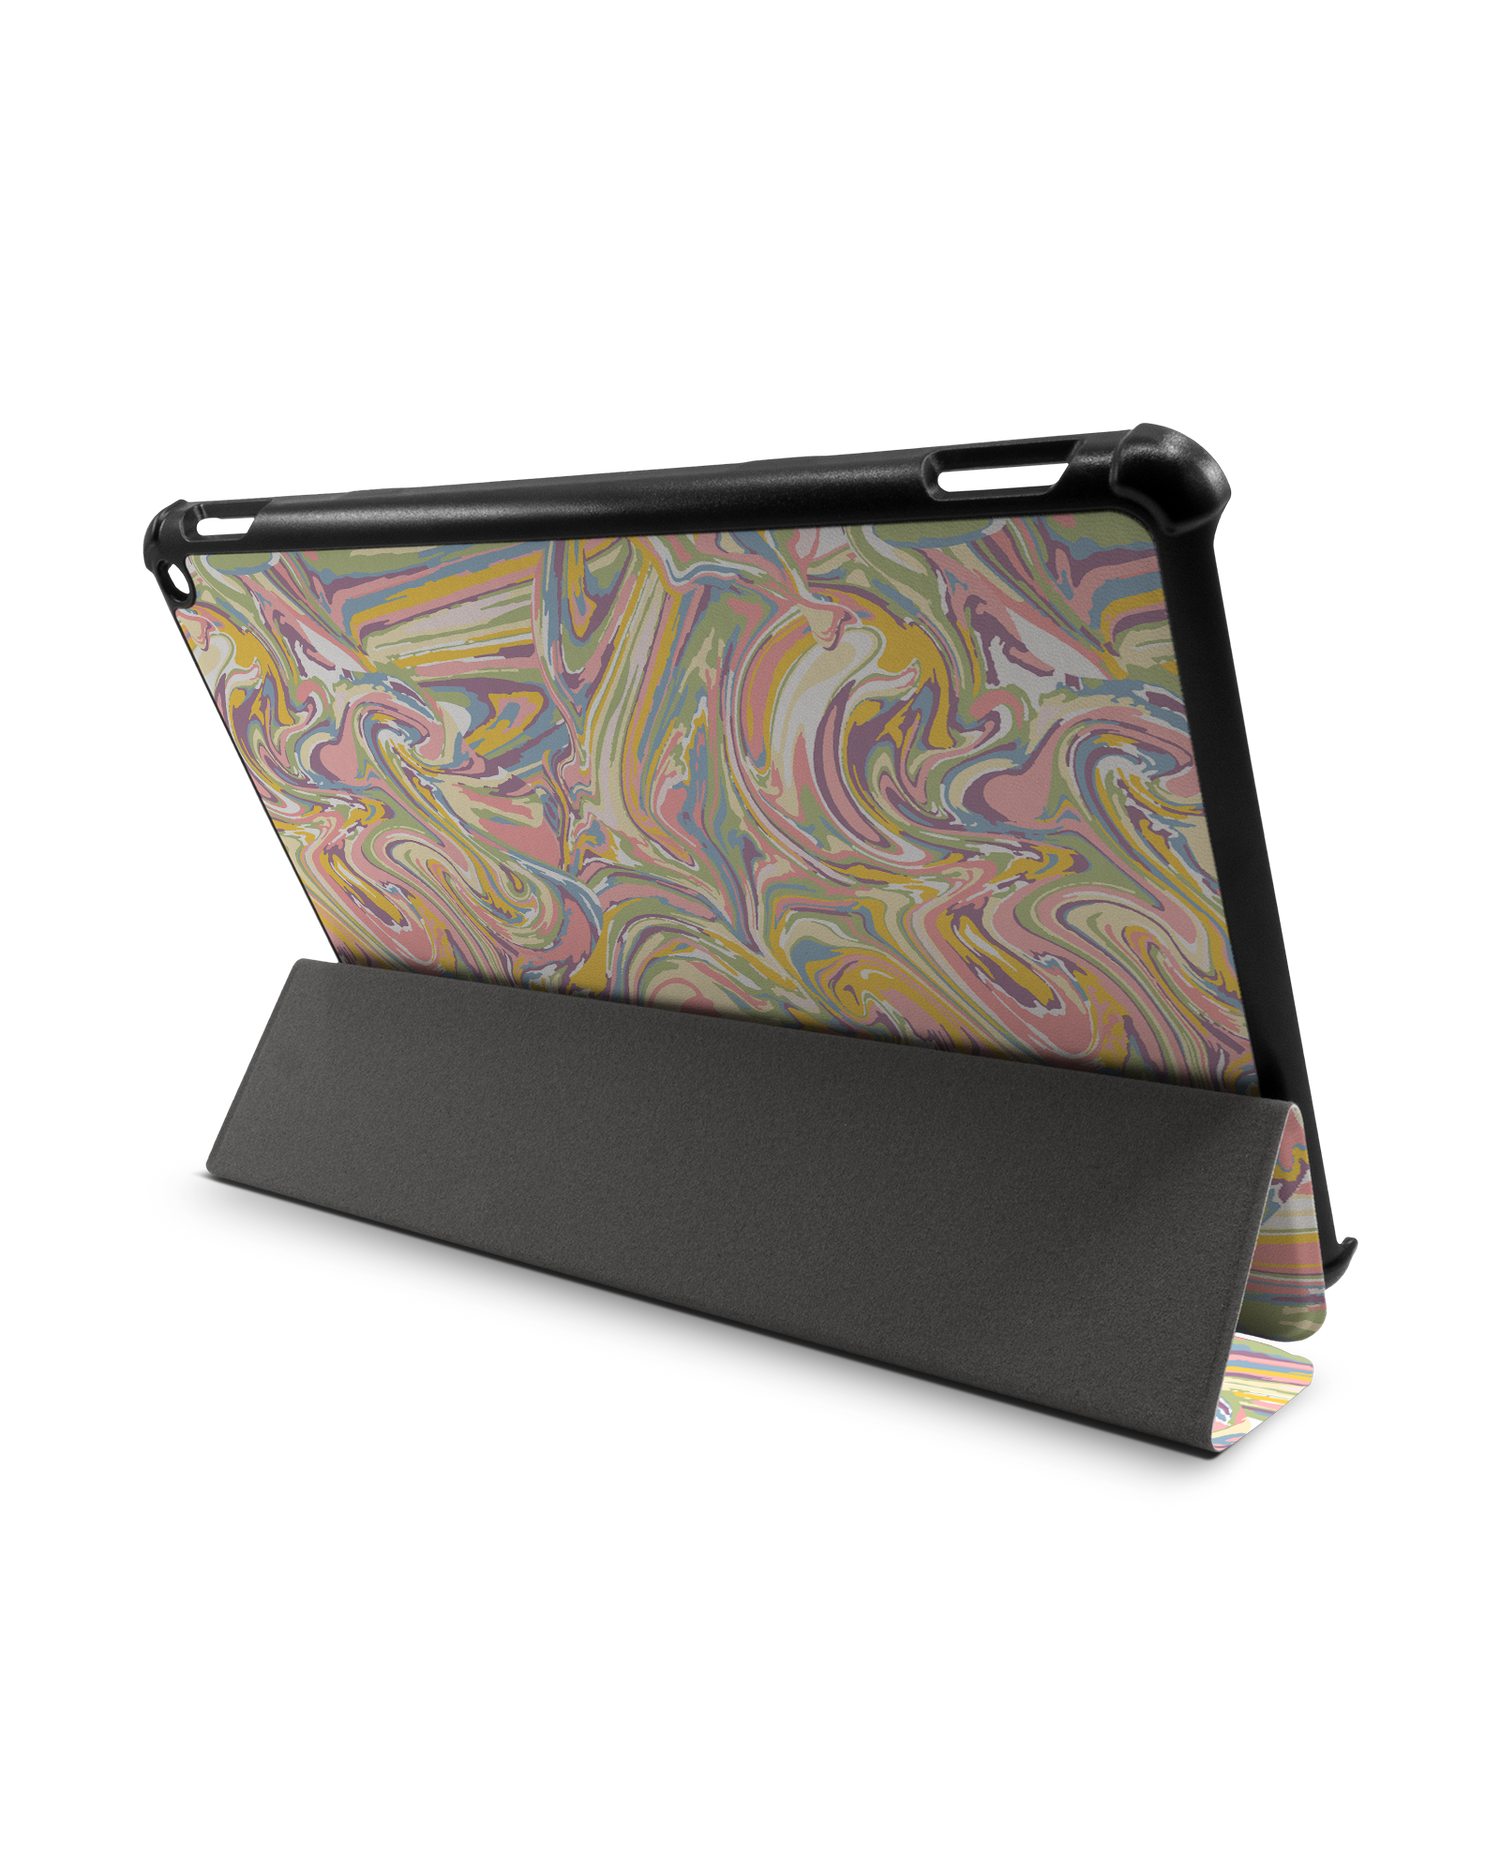 Psychedelic Optics Tablet Smart Case for Amazon Fire HD 10 (2021): Used as Stand